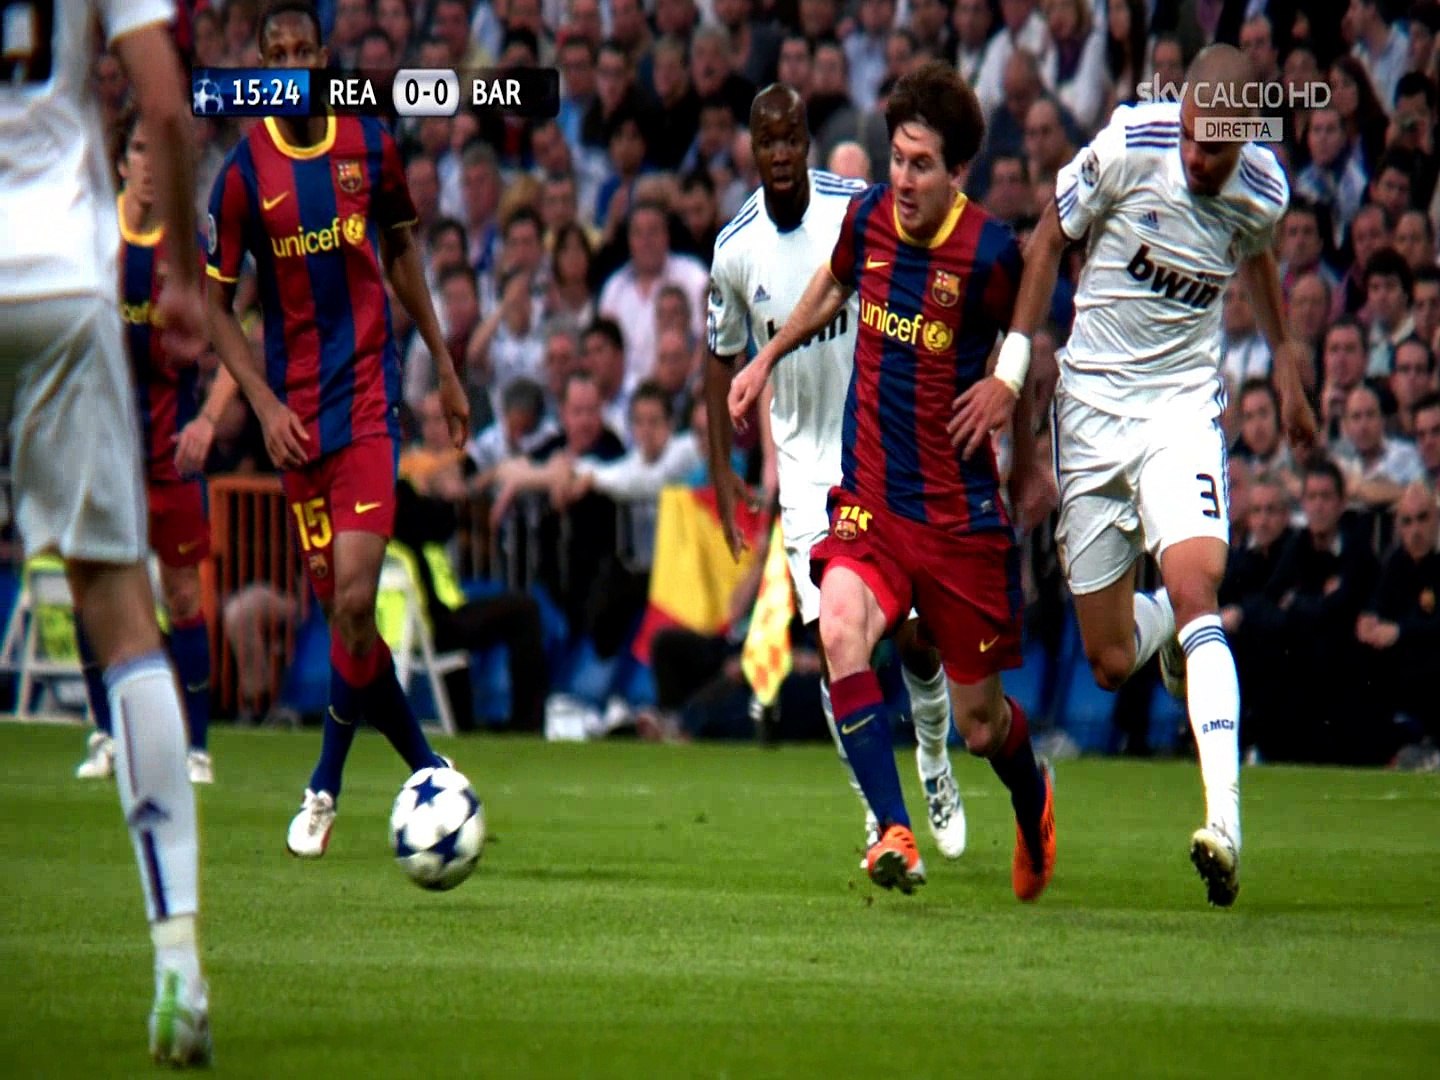 Lionel Messi vs Real Madrid (UCL) (Away) 10-11 HD 1080i - video Dailymotion